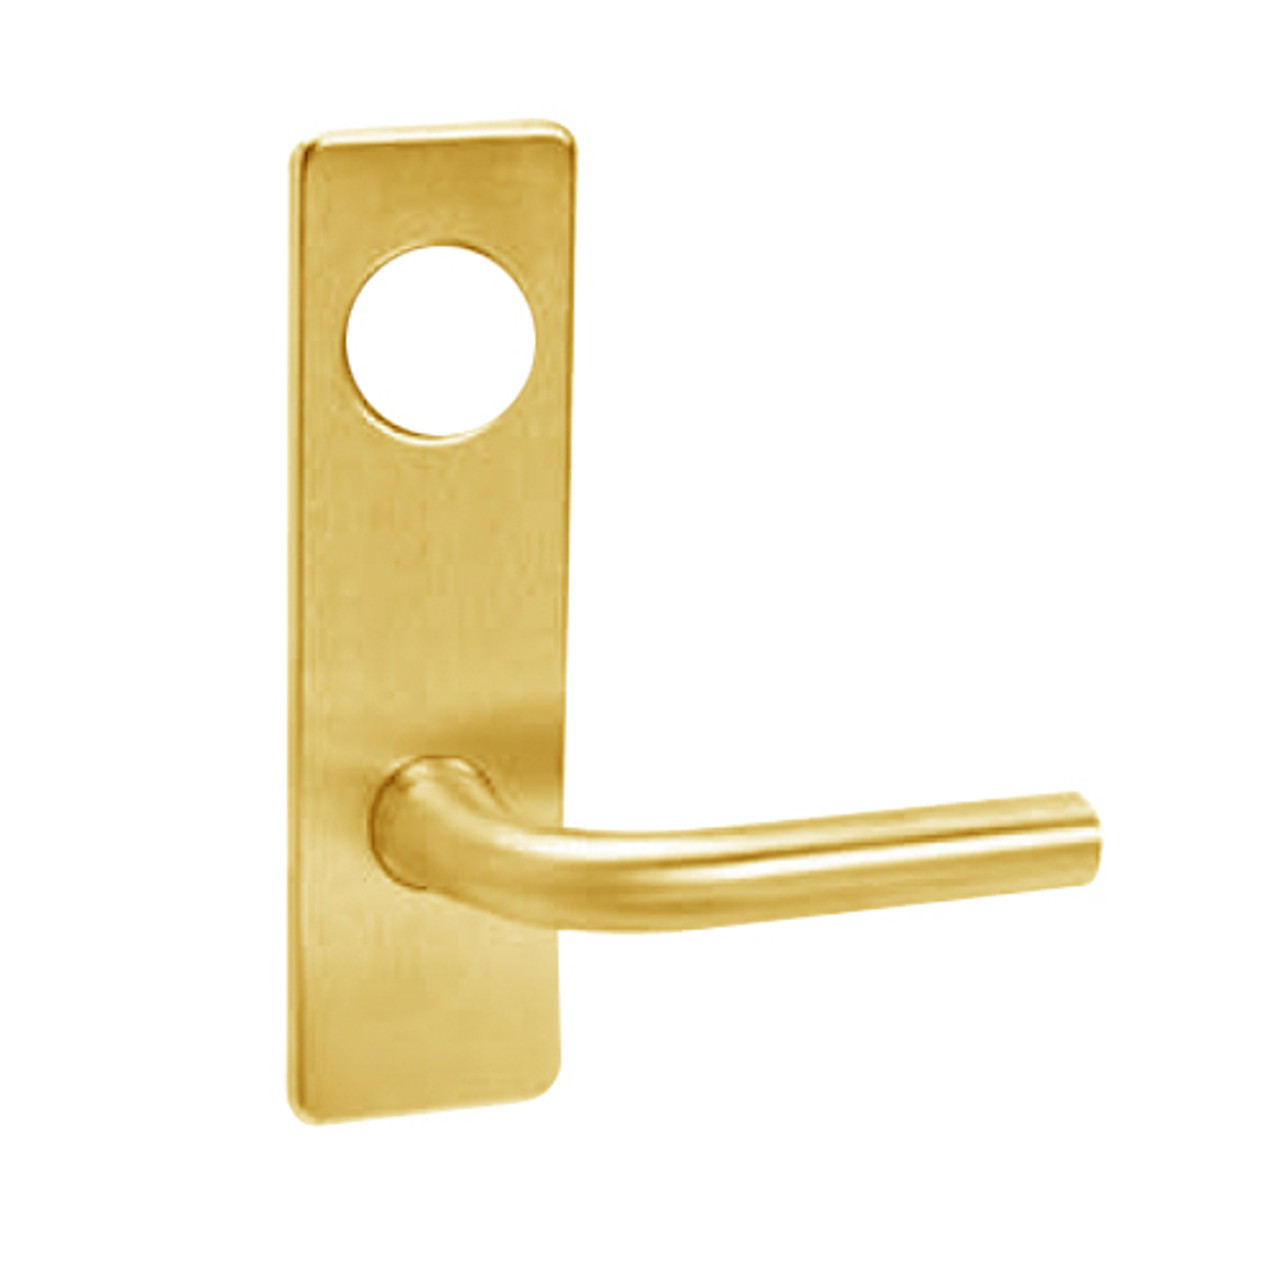 ML2032-RSM-605-CL6 Corbin Russwin ML2000 Series IC 6-Pin Less Core Mortise Institution Locksets with Regis Lever in Bright Brass